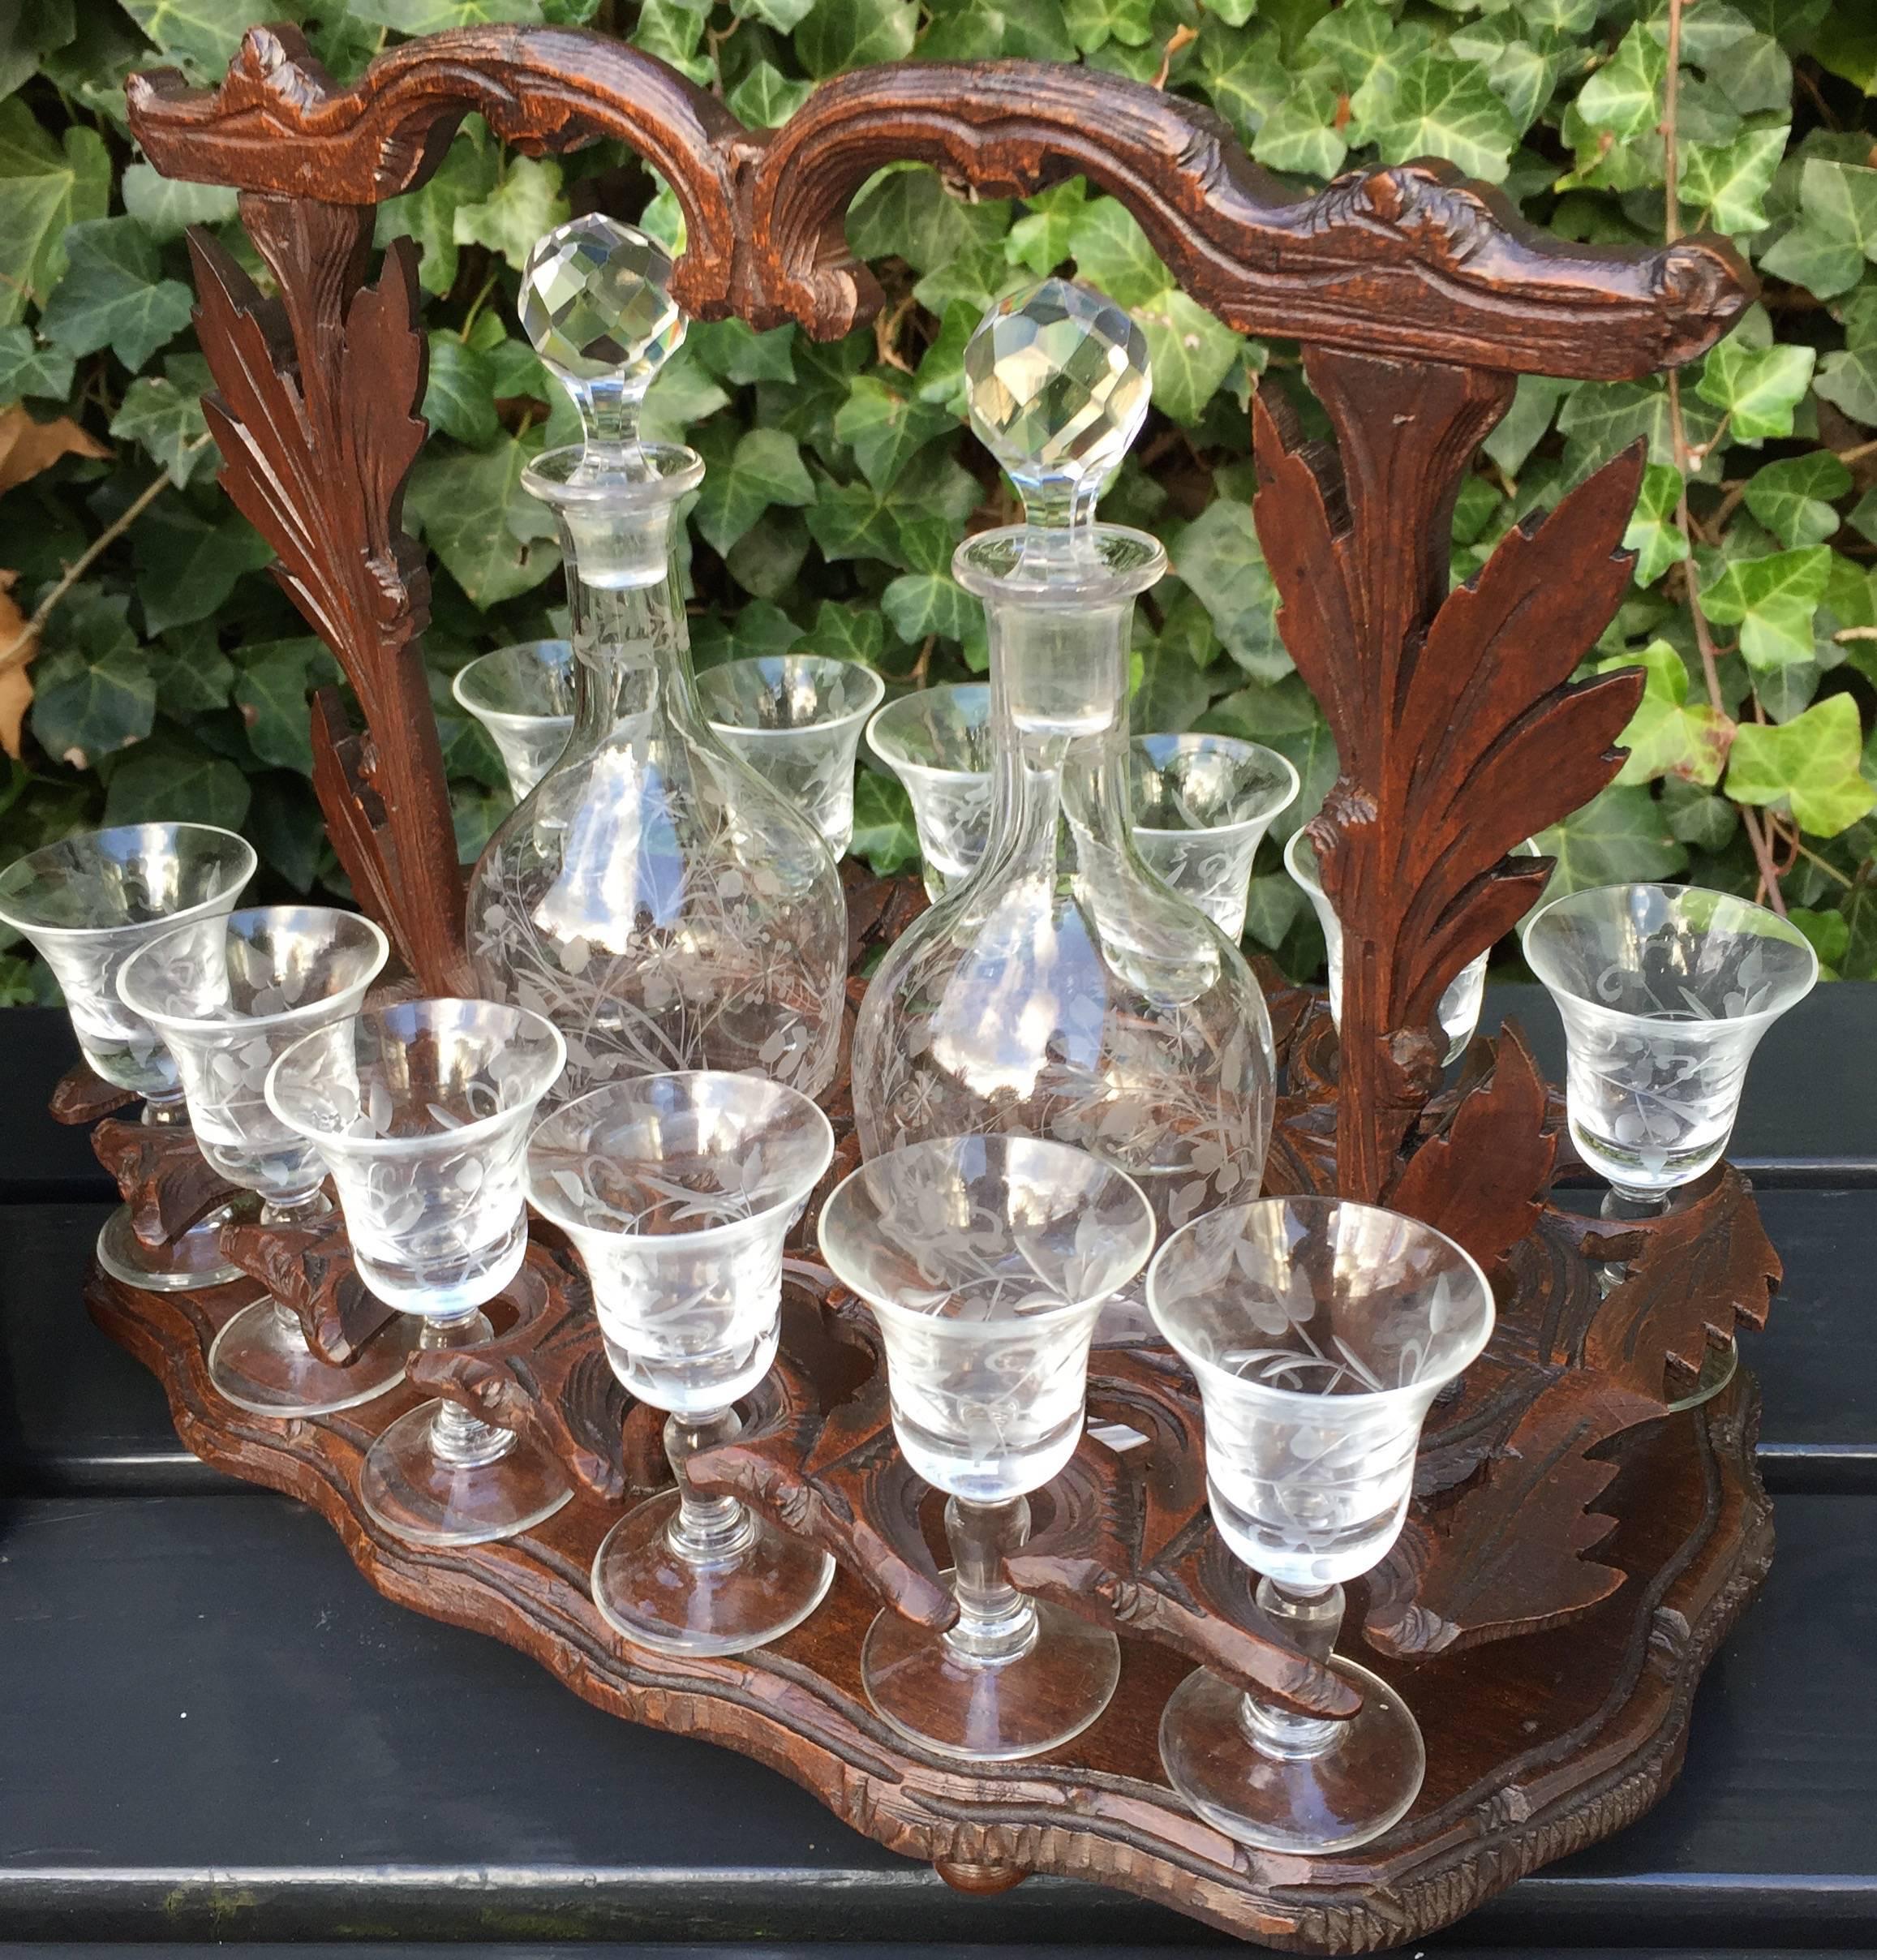 Hand-Carved 19th Century Black Forest era Victorian Liquor Tantalus with Glasses & Decanters